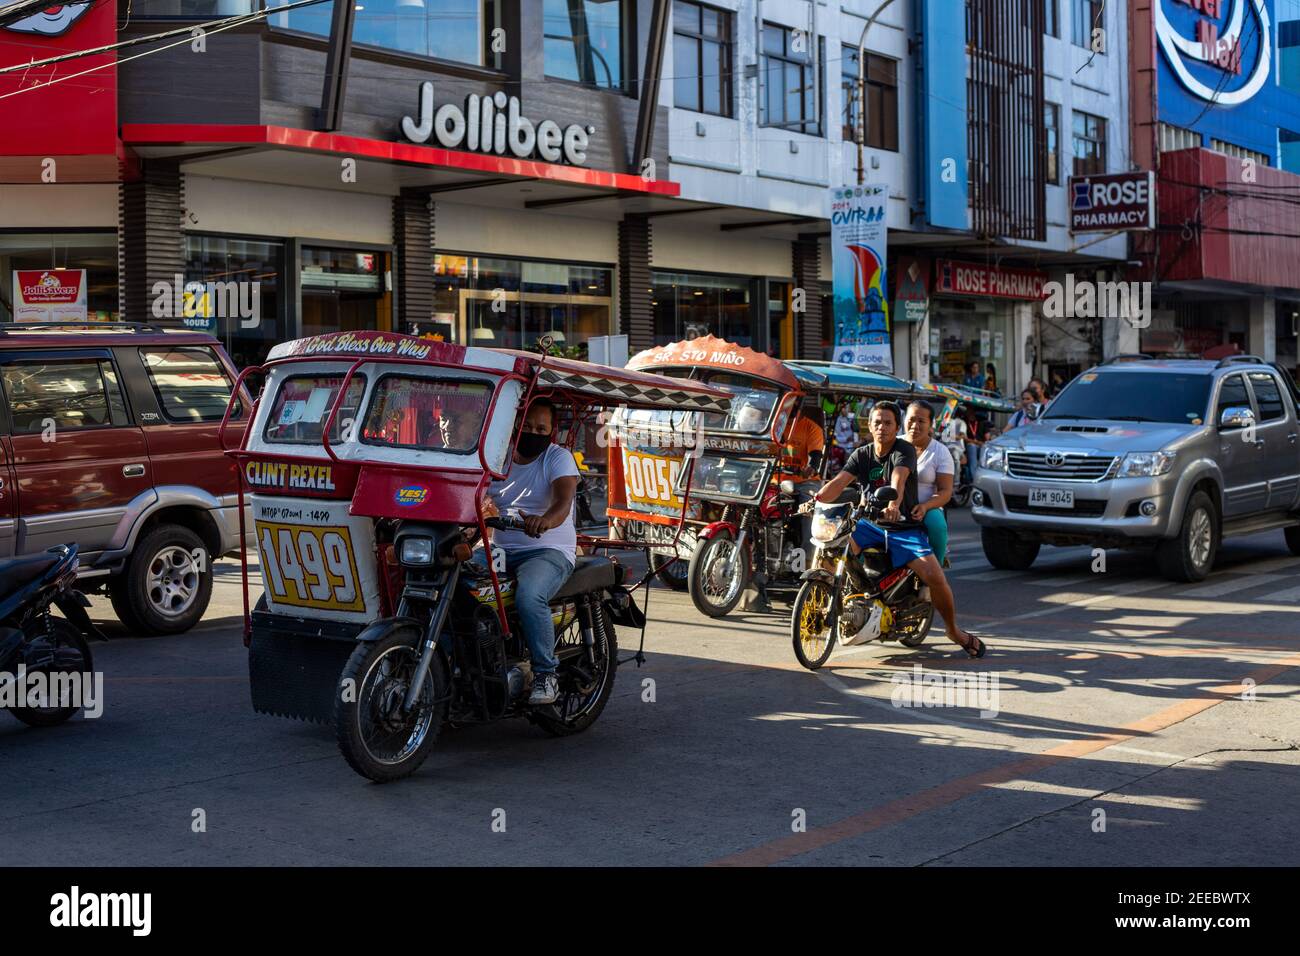 Dumaguete, the Philippines - 10 Mar 2019: Motorbike on asian city street. Filipino tricycle and bike. Jollibee cafe. Street traffic in Asia. Modern ci Stock Photo